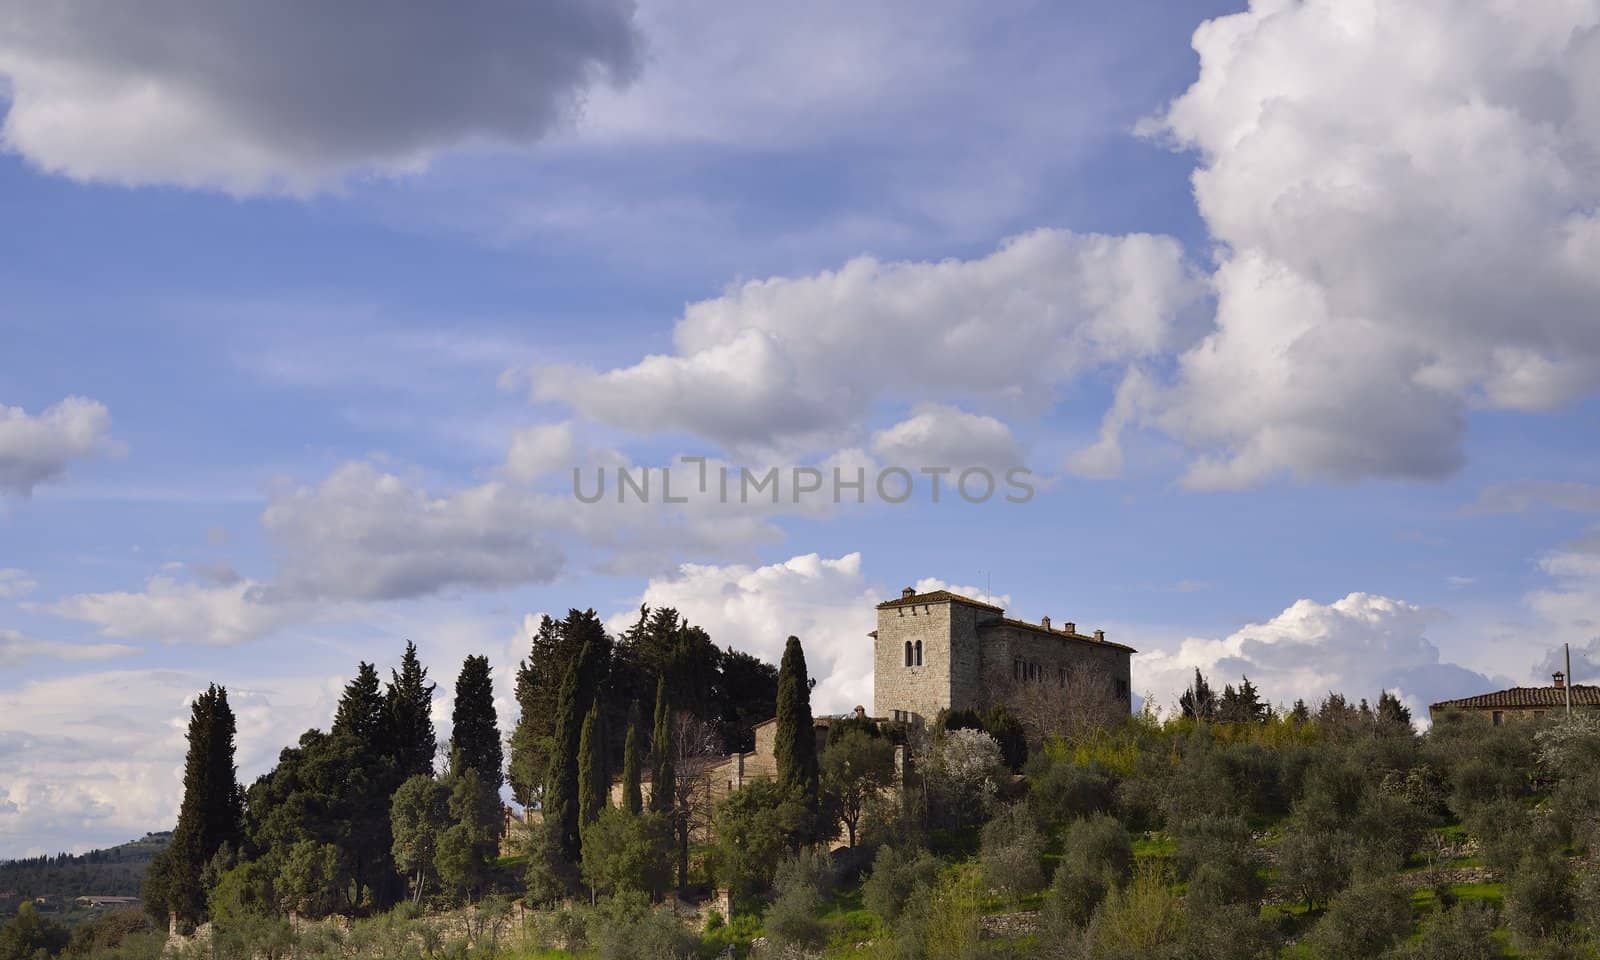 Tuscany landscape with house, olives and vineyard on hill